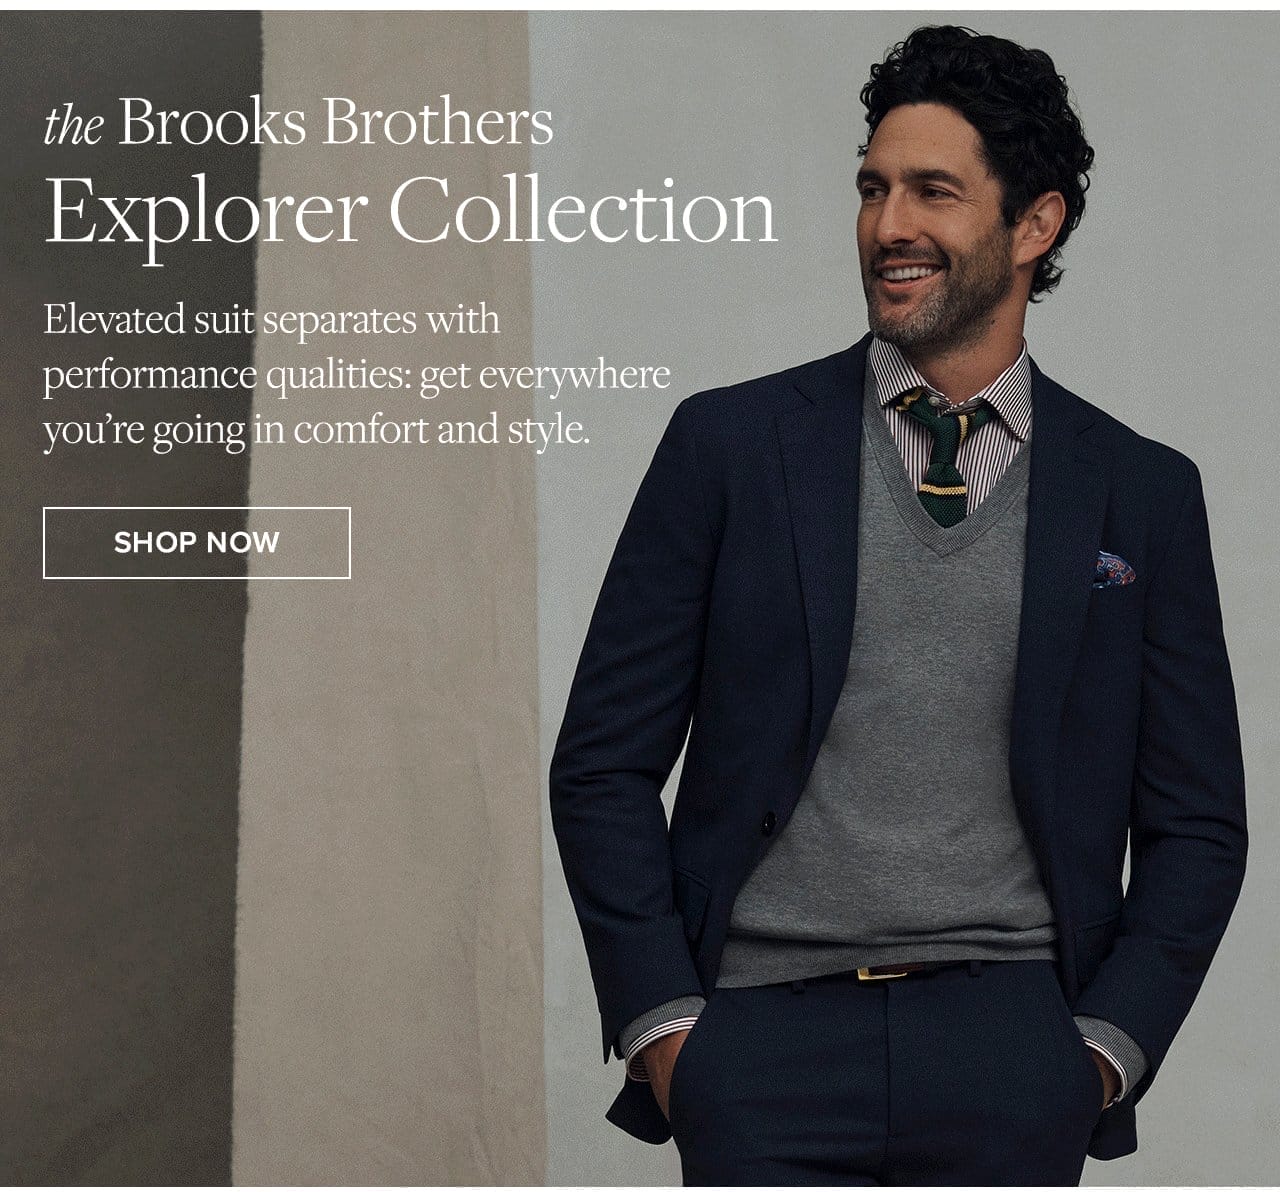 the Brooks Brothers Explorer Collection Elevated suit separates with performance qualities: get everywhere you're going in comfort and style. Shop Now